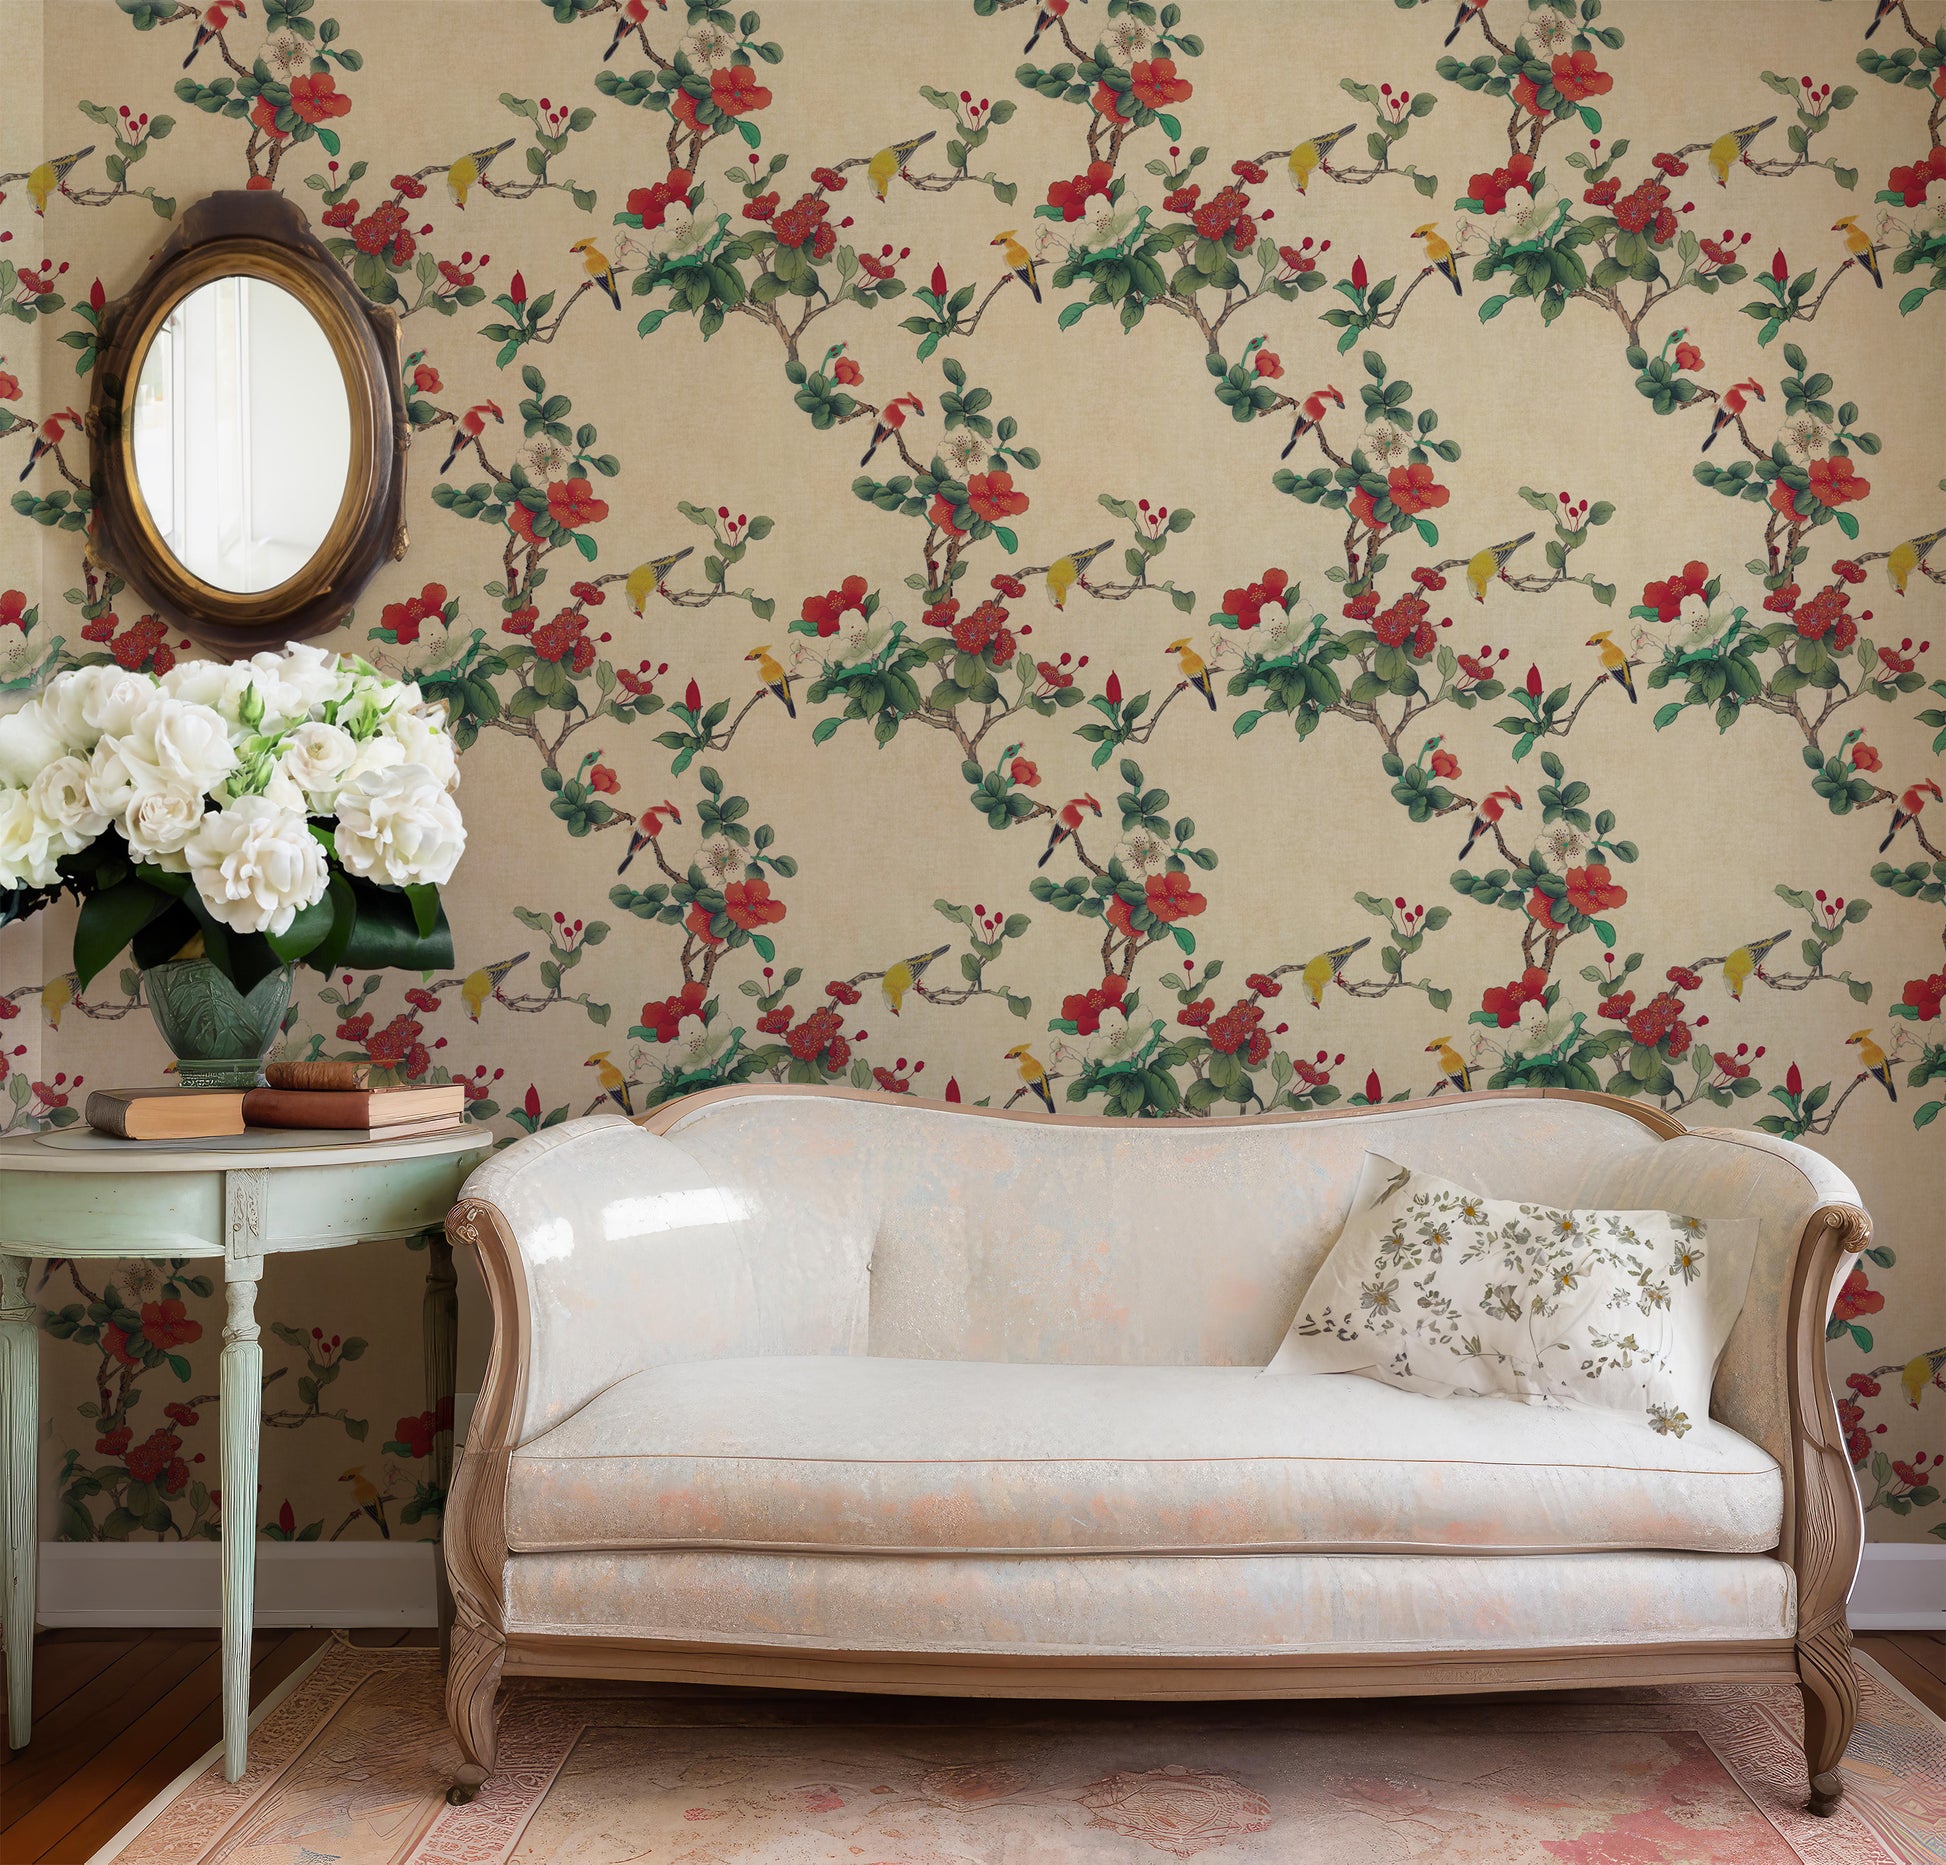  Red Flowers with Birds Chinoiserie Removable Wallpaper | Canada